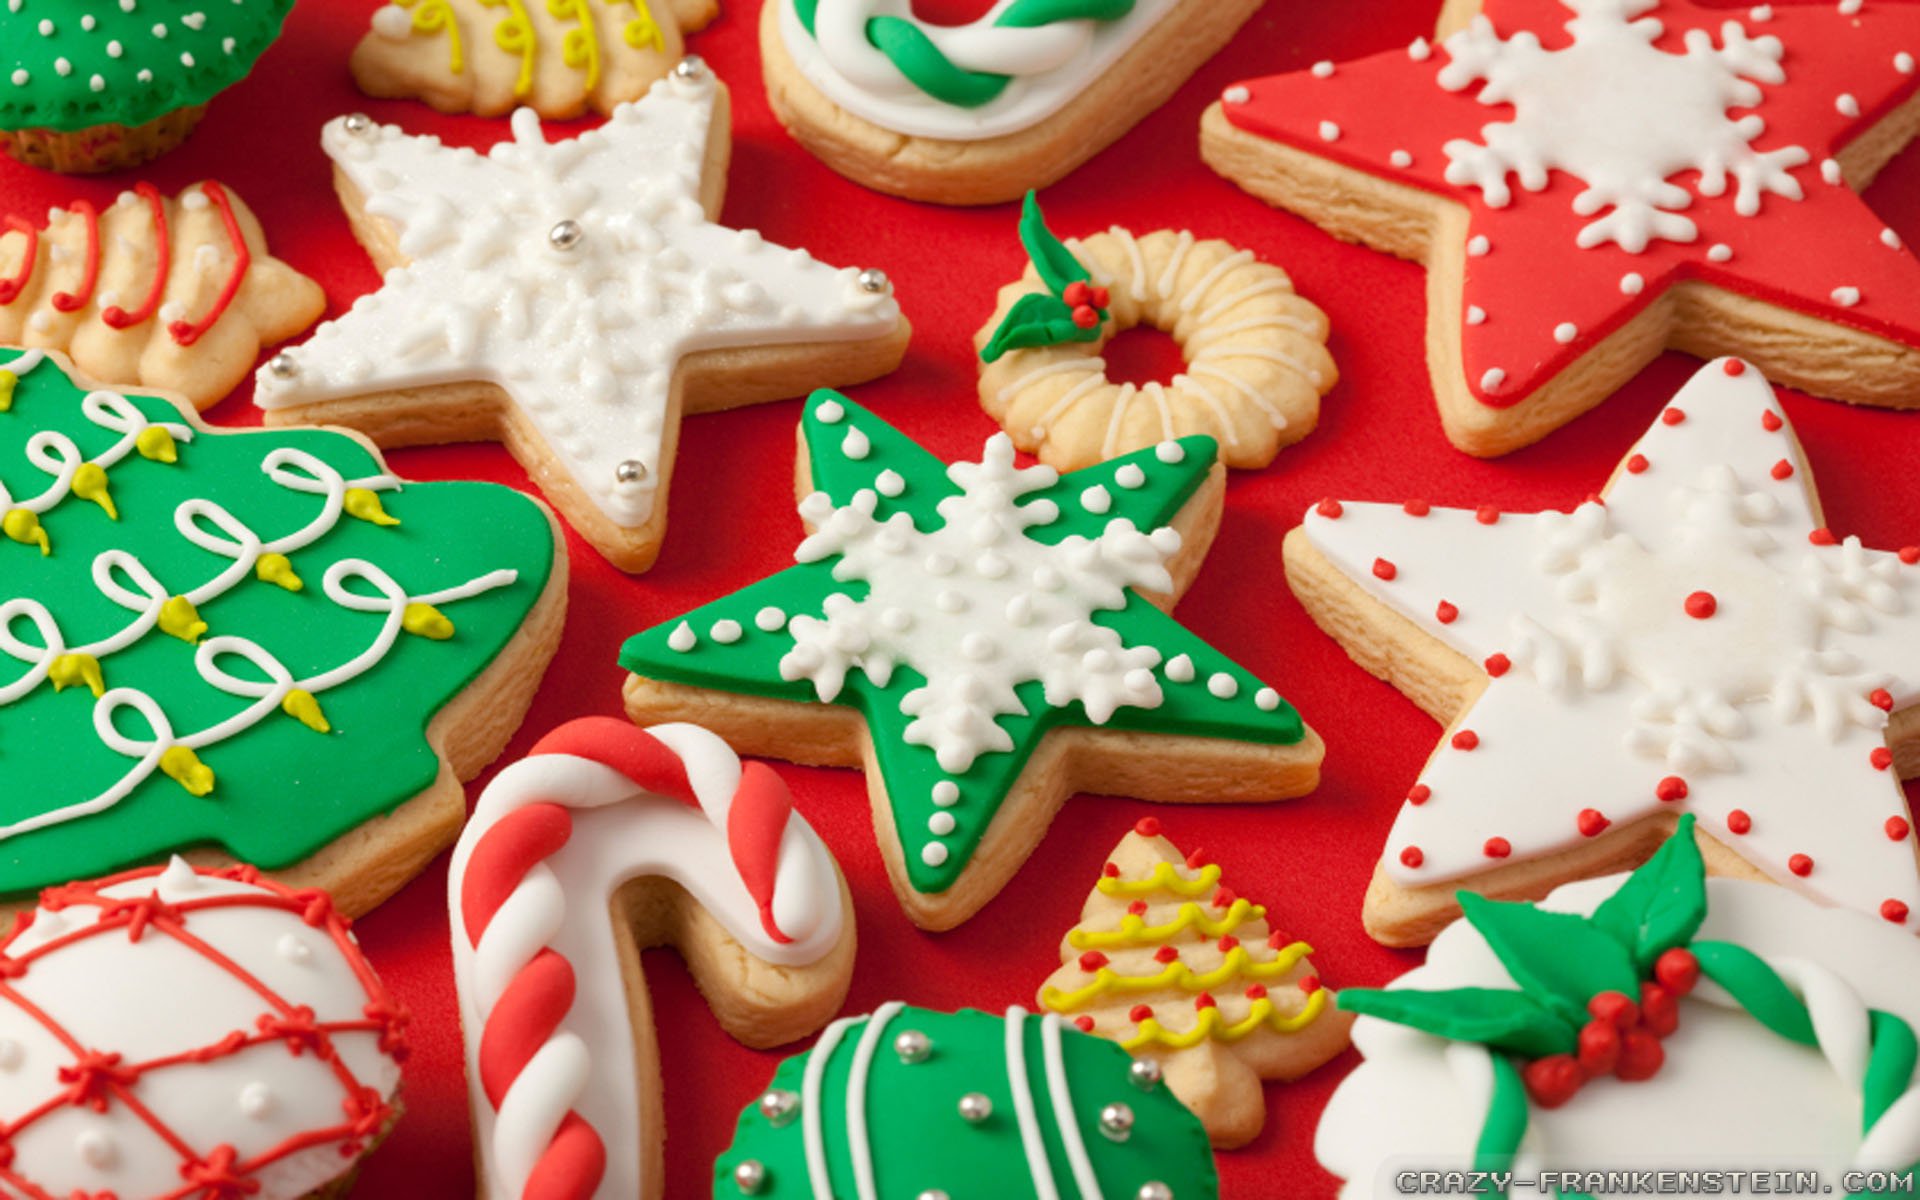 The Cookie that Caused the Traditional Holiday Cold